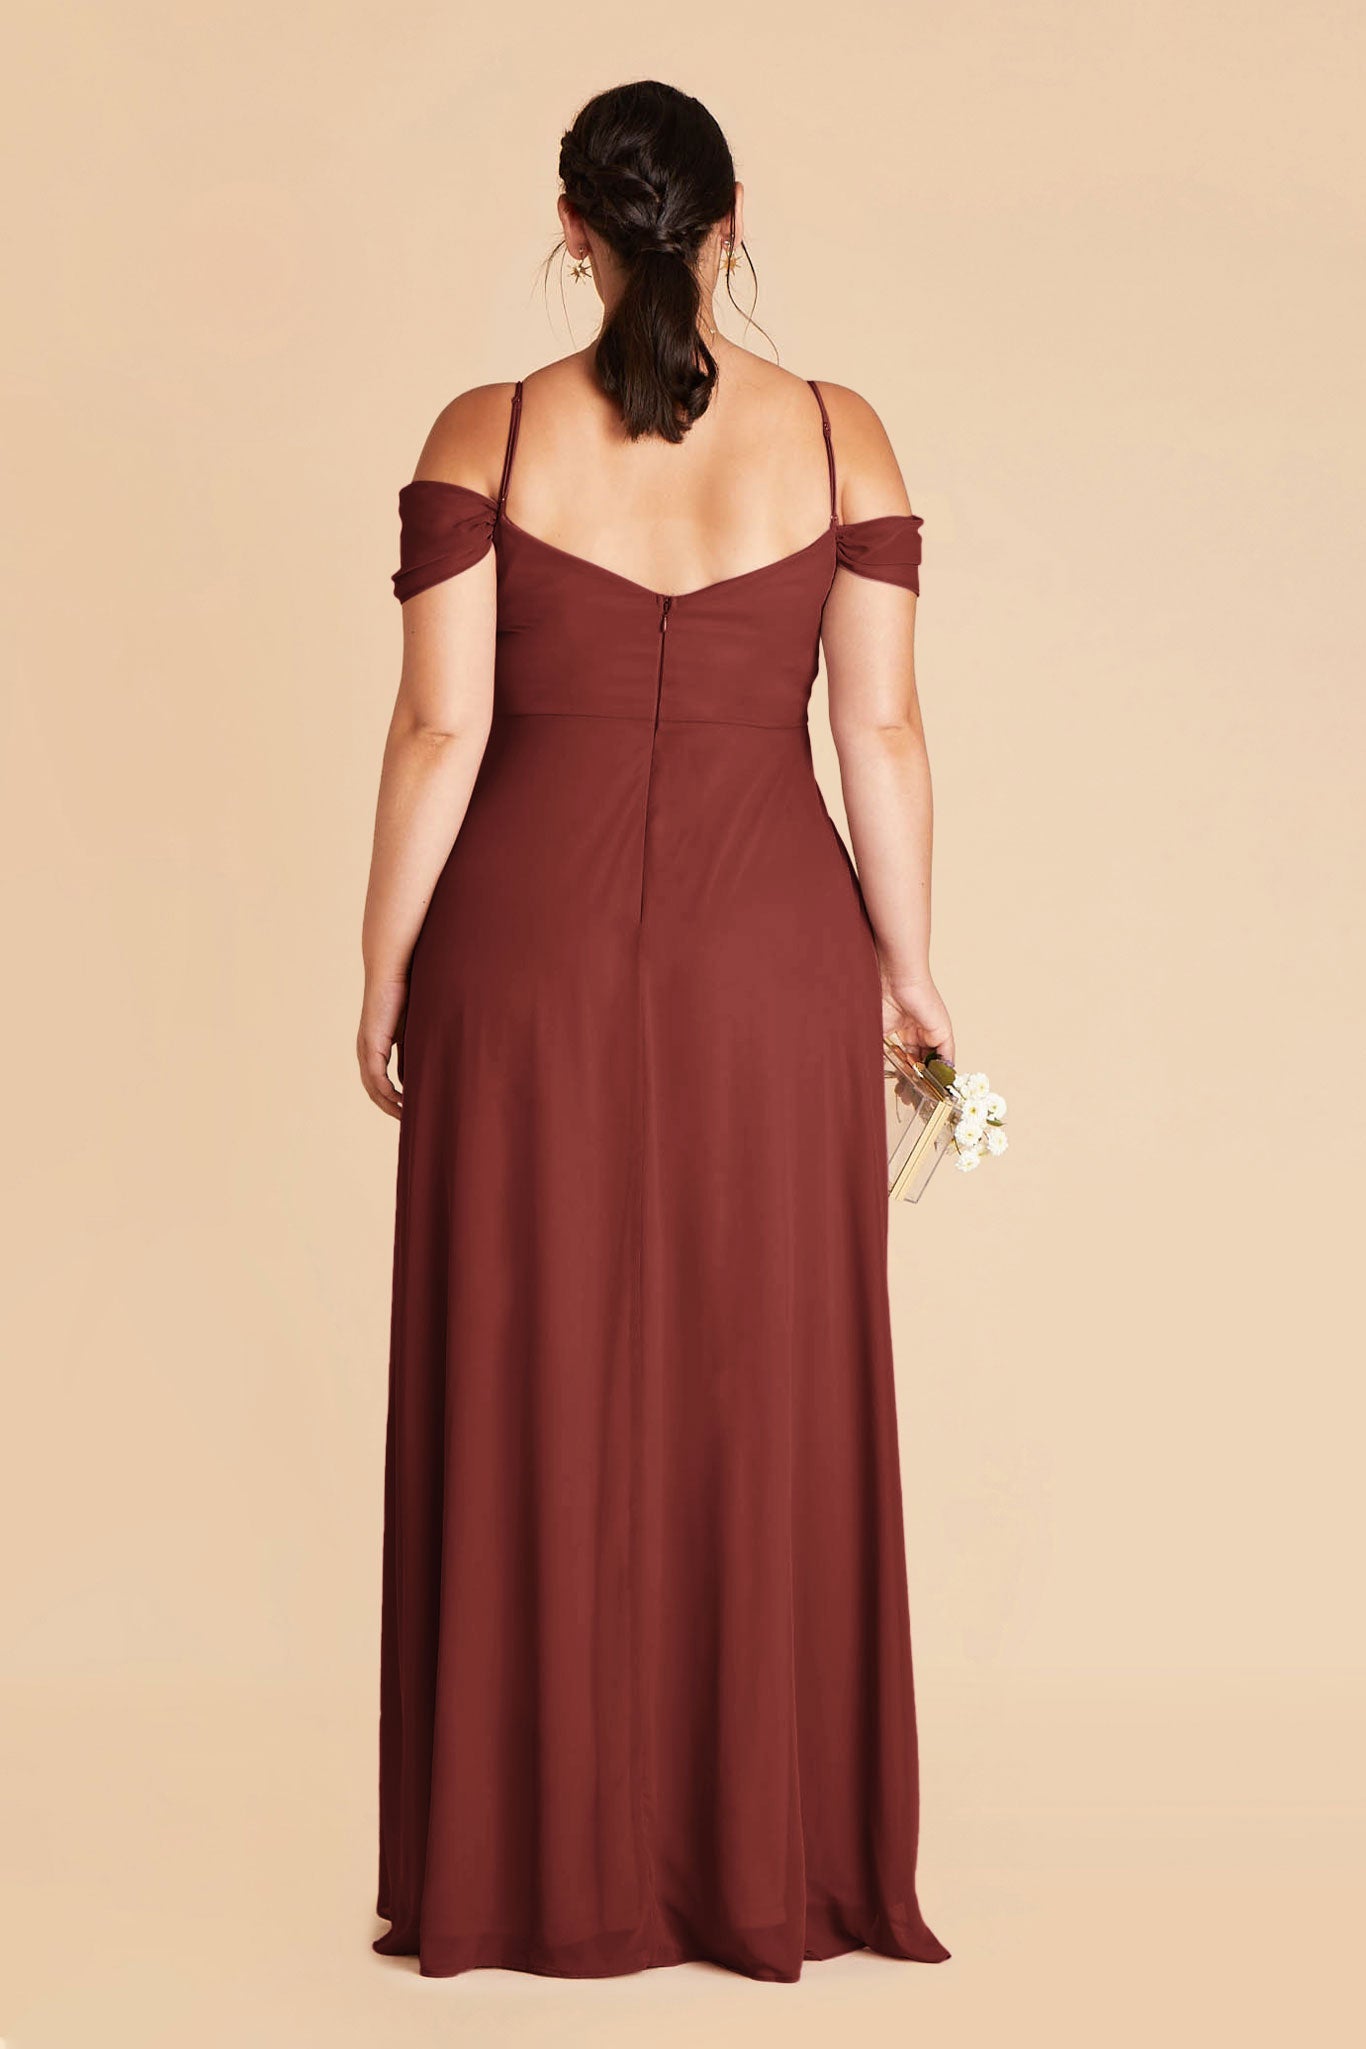 Rosewood Devin Convertible Dress by Birdy Grey